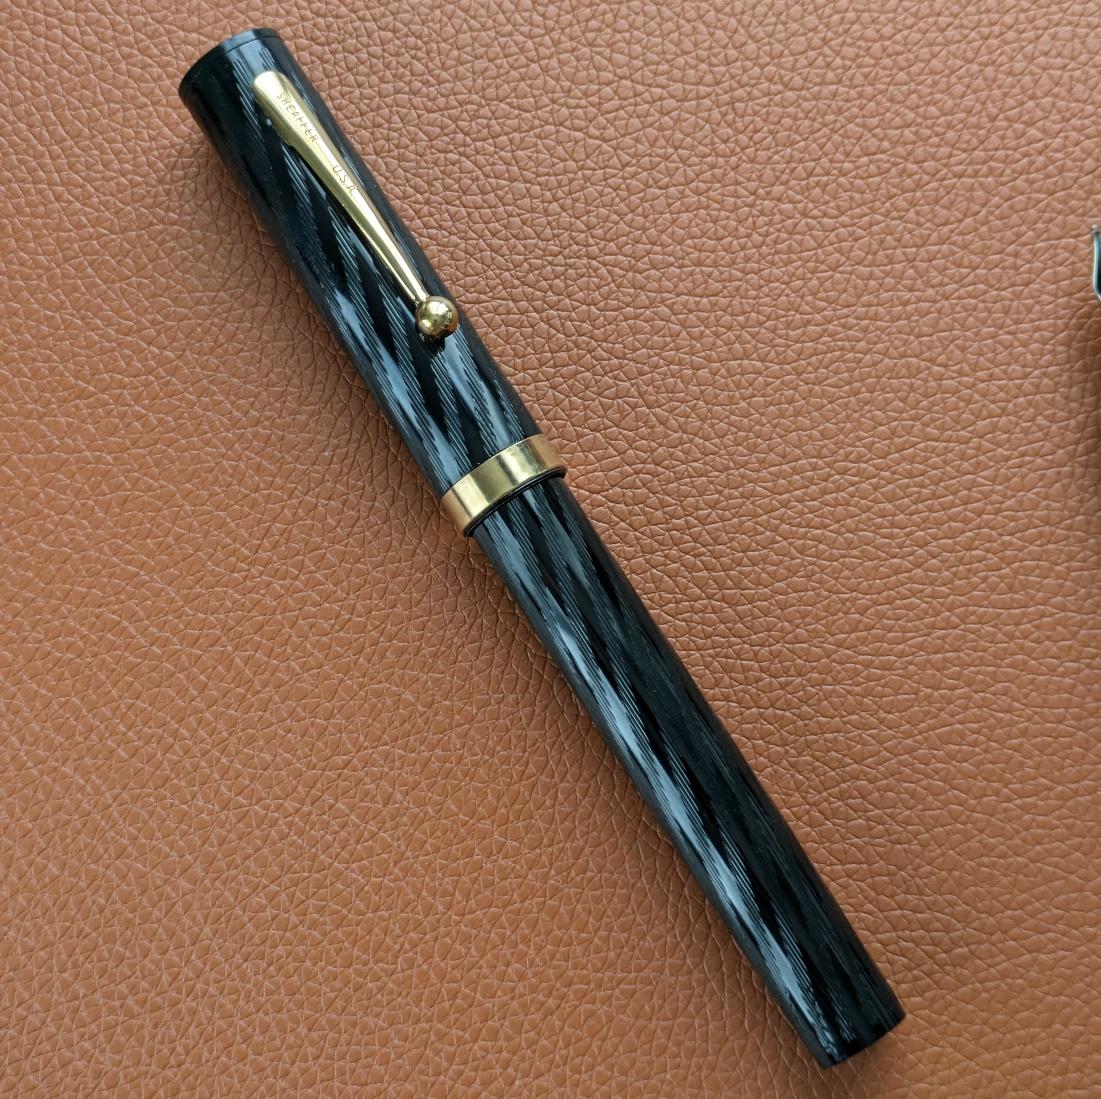 Sheaffer Old Timer. The spiral chasing pattern is referred to as torsade from what I've seen, but I don't know that to be the official designation.